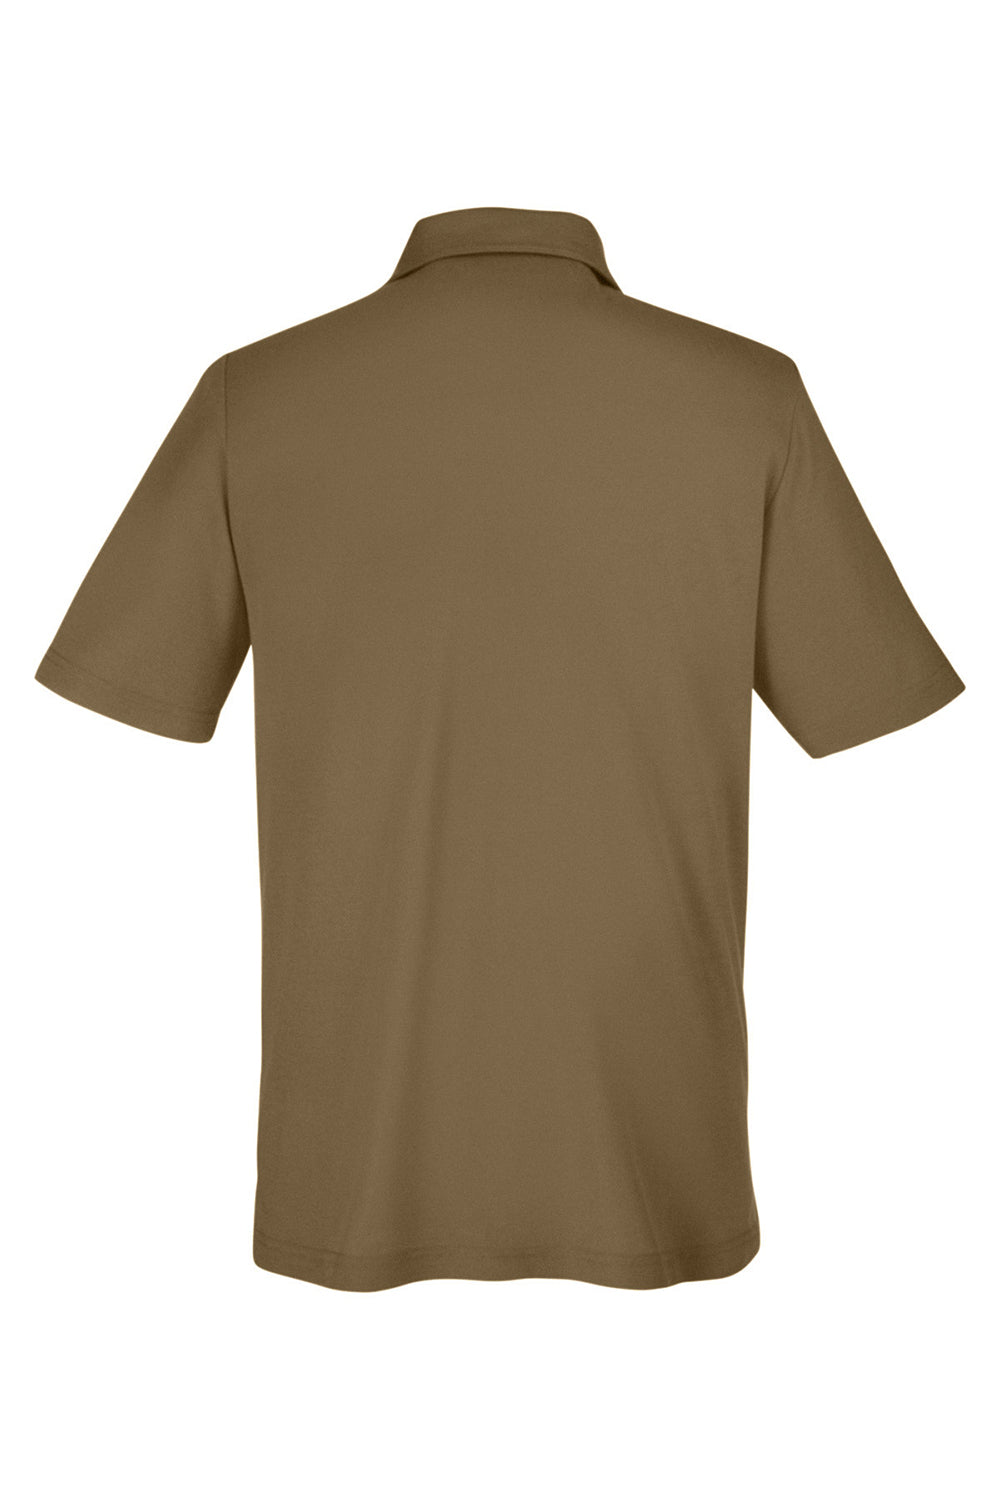 Core 365 CE112 Mens Fusion ChromaSoft Performance Moisture Wicking Short Sleeve Polo Shirt Coyote Brown Flat Back